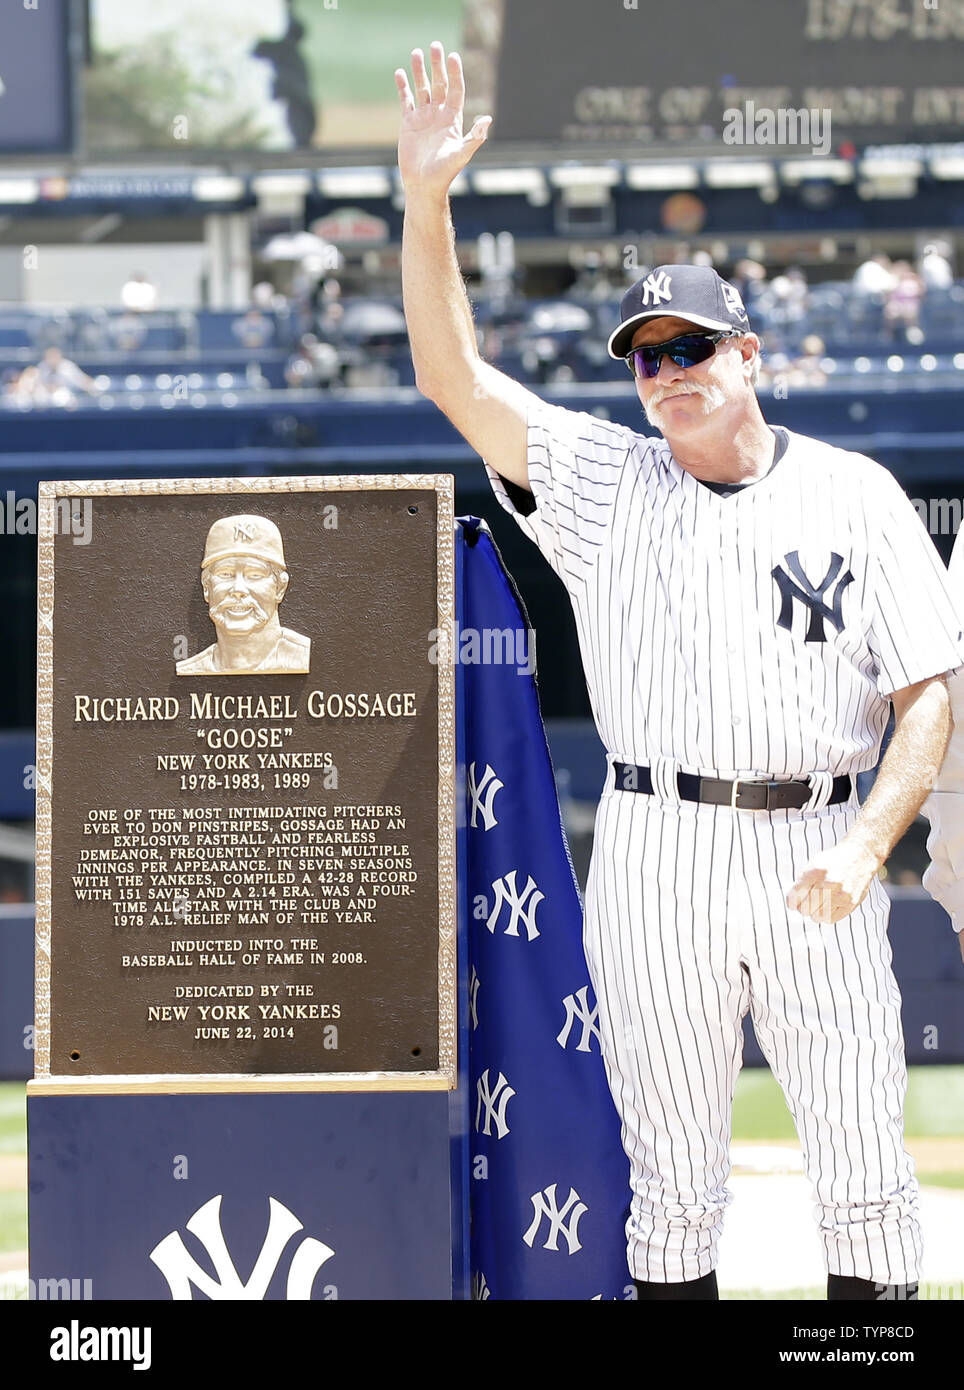 Retired New York Yankee pitcher Goose Gossage waves while standing